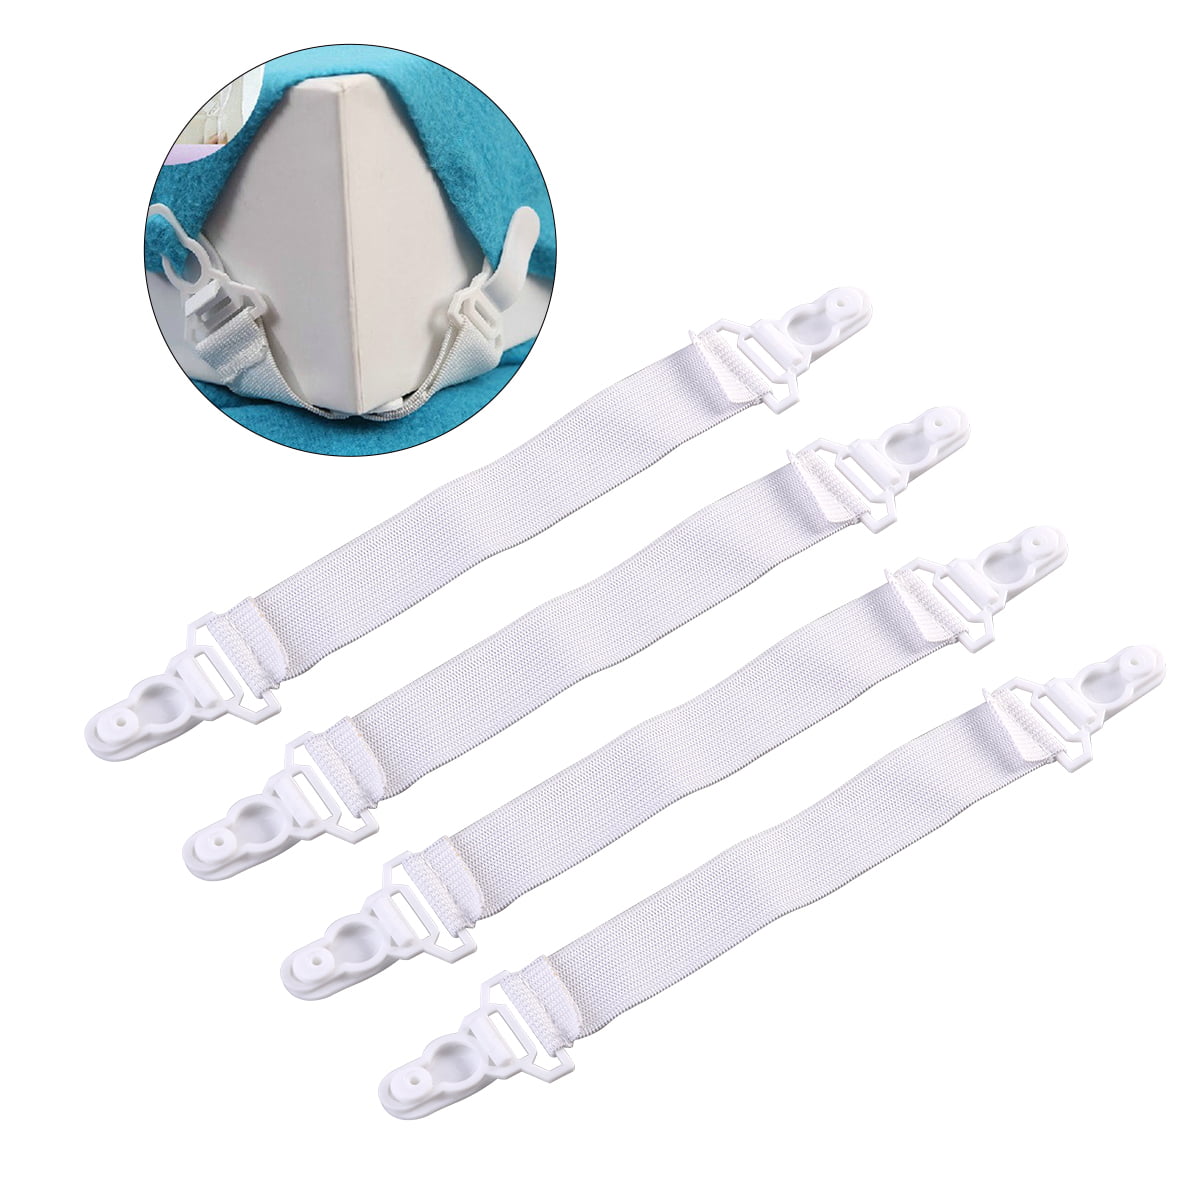 20pcs Fitted Bed Sheet Mattress Grippers Suspenders Elastic Garter Fastener Holder Clips Straps Rubber Button Hook White Laliva Buckles 